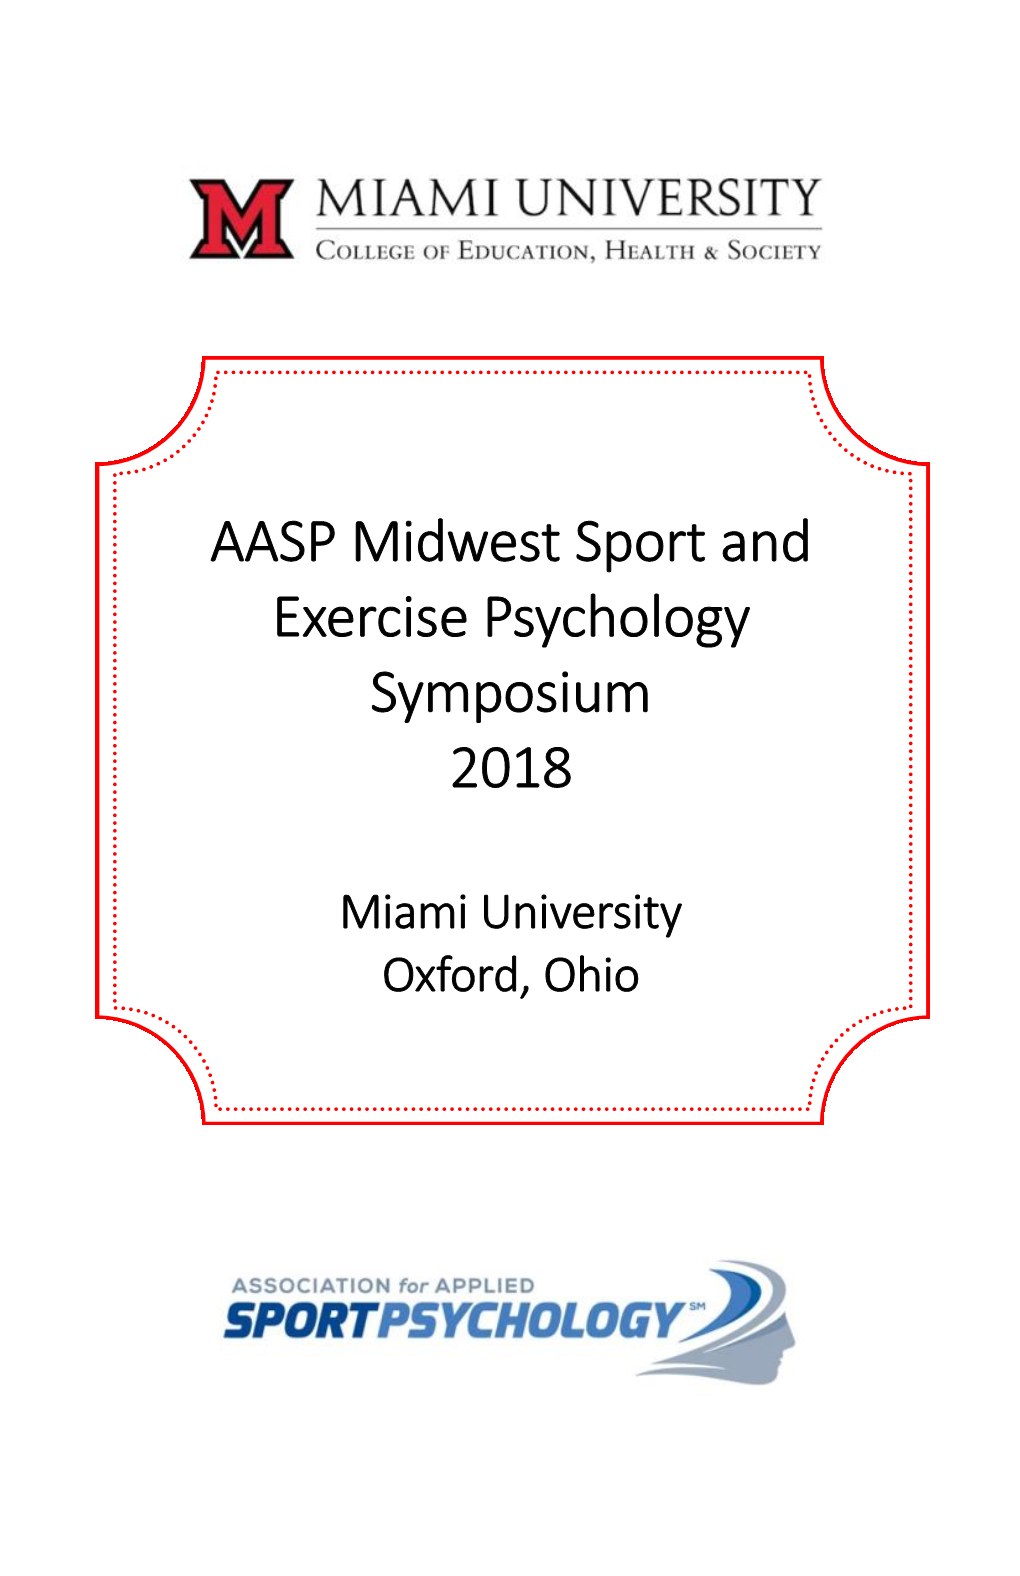 AASP Midwest Sport and Exercise Psychology Symposium 2018